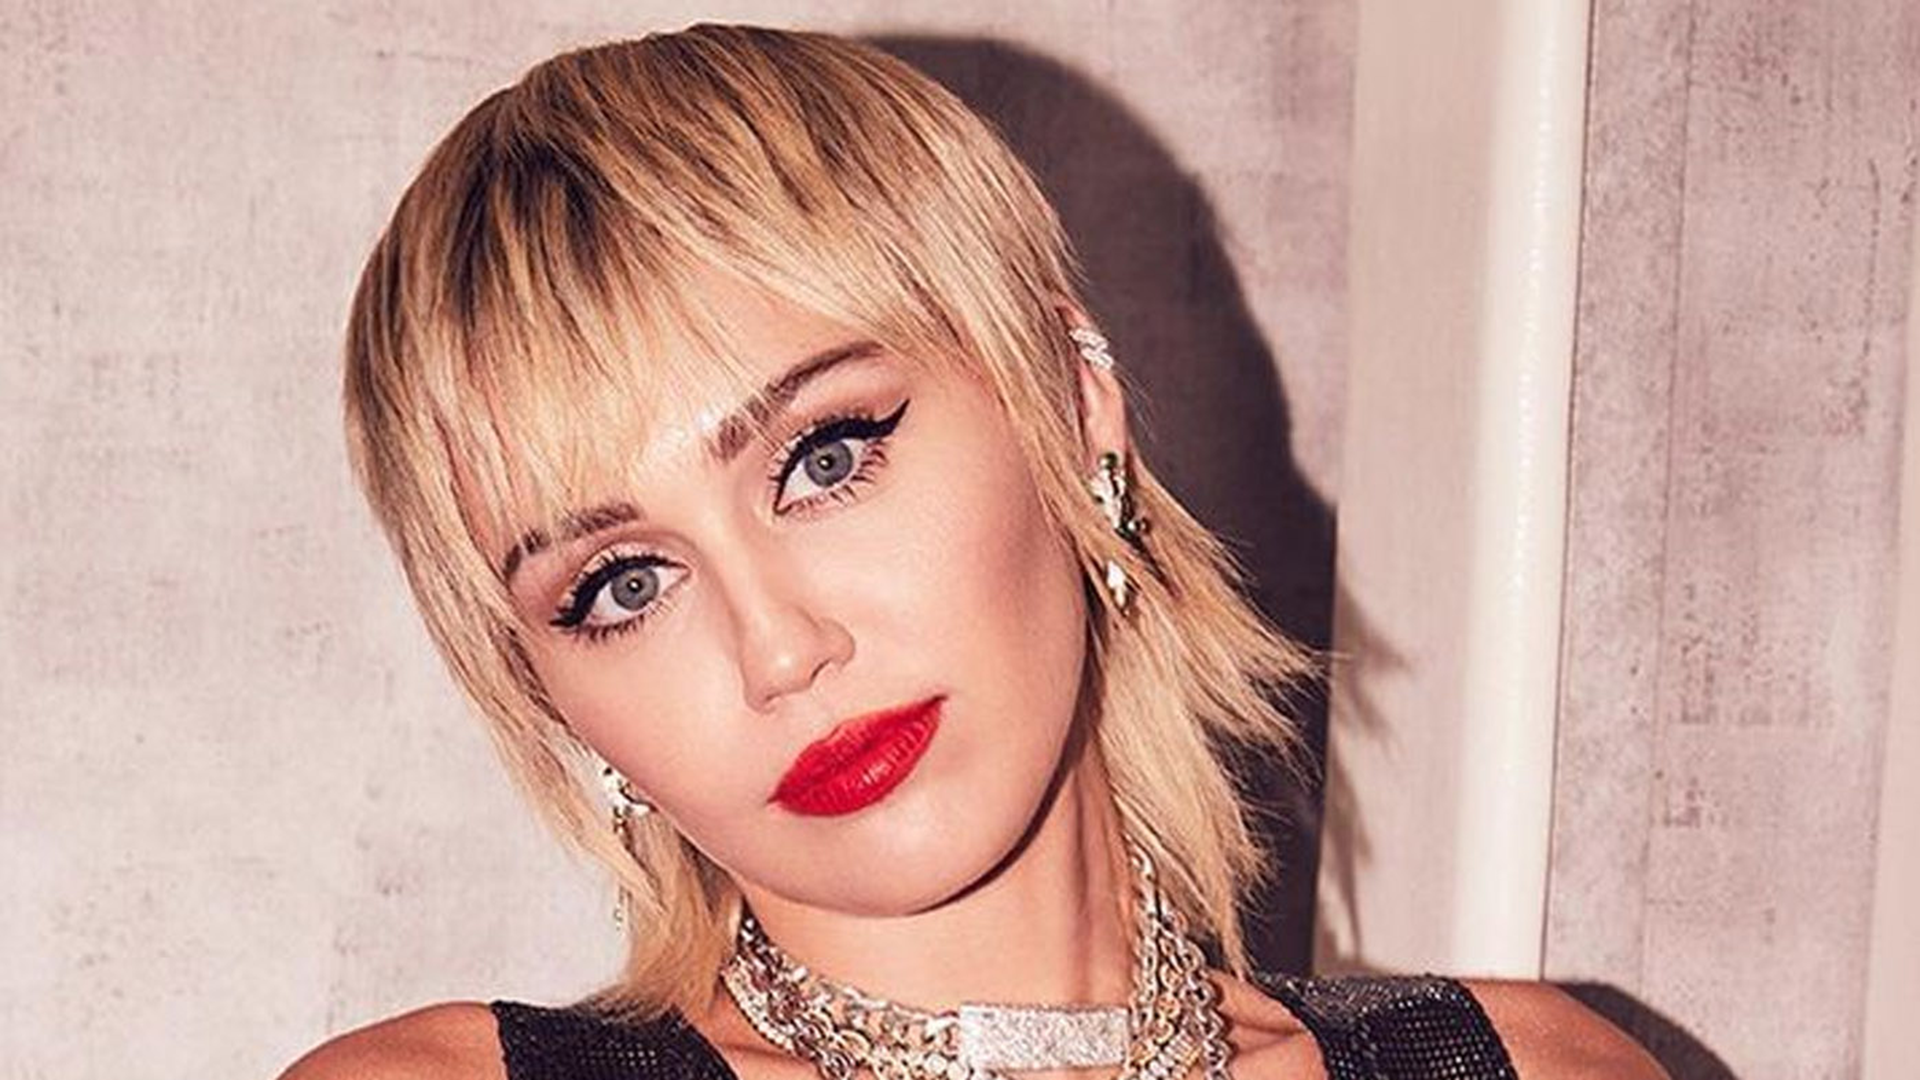 Miley Cyrus makes $12 million move as she adds to her property portfolio